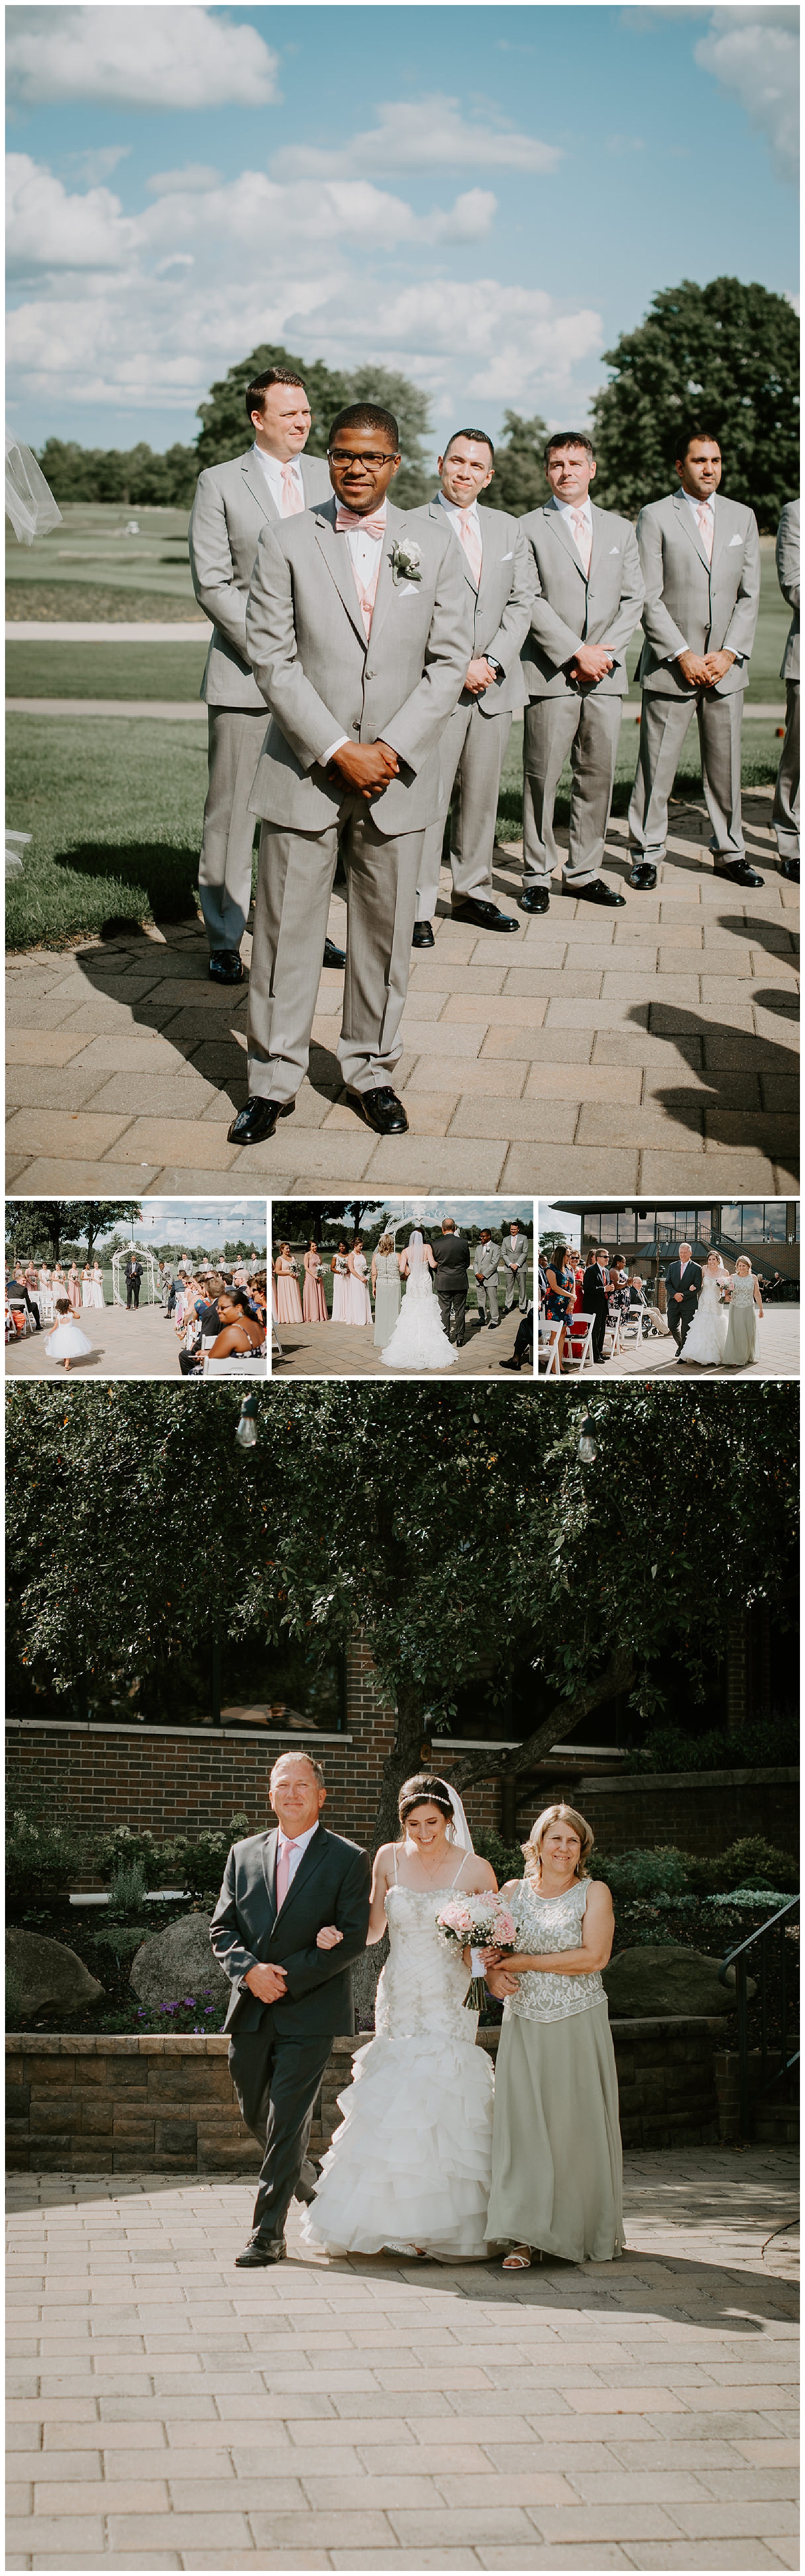 Detroit Wedding Photography at Meadowbrook Country Club Interracial couple michigan